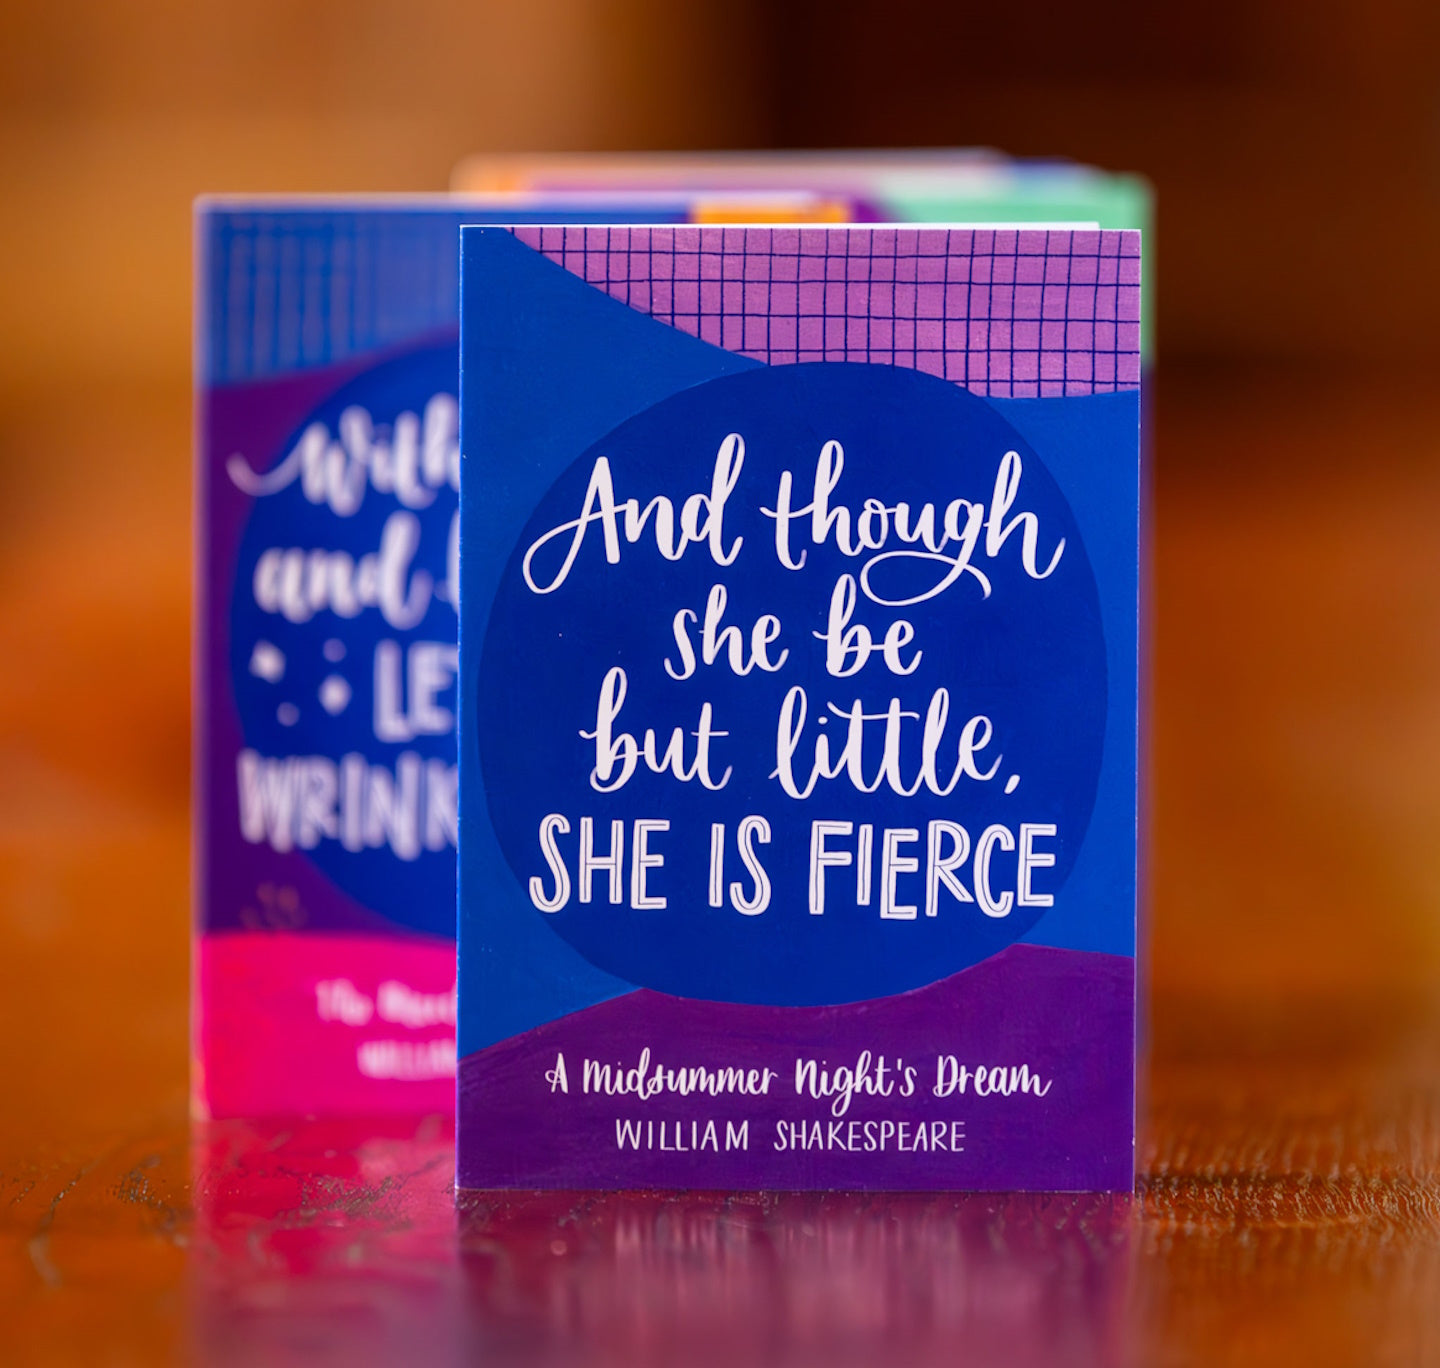 Greeting Card: "And though she be but little, she is fierce"